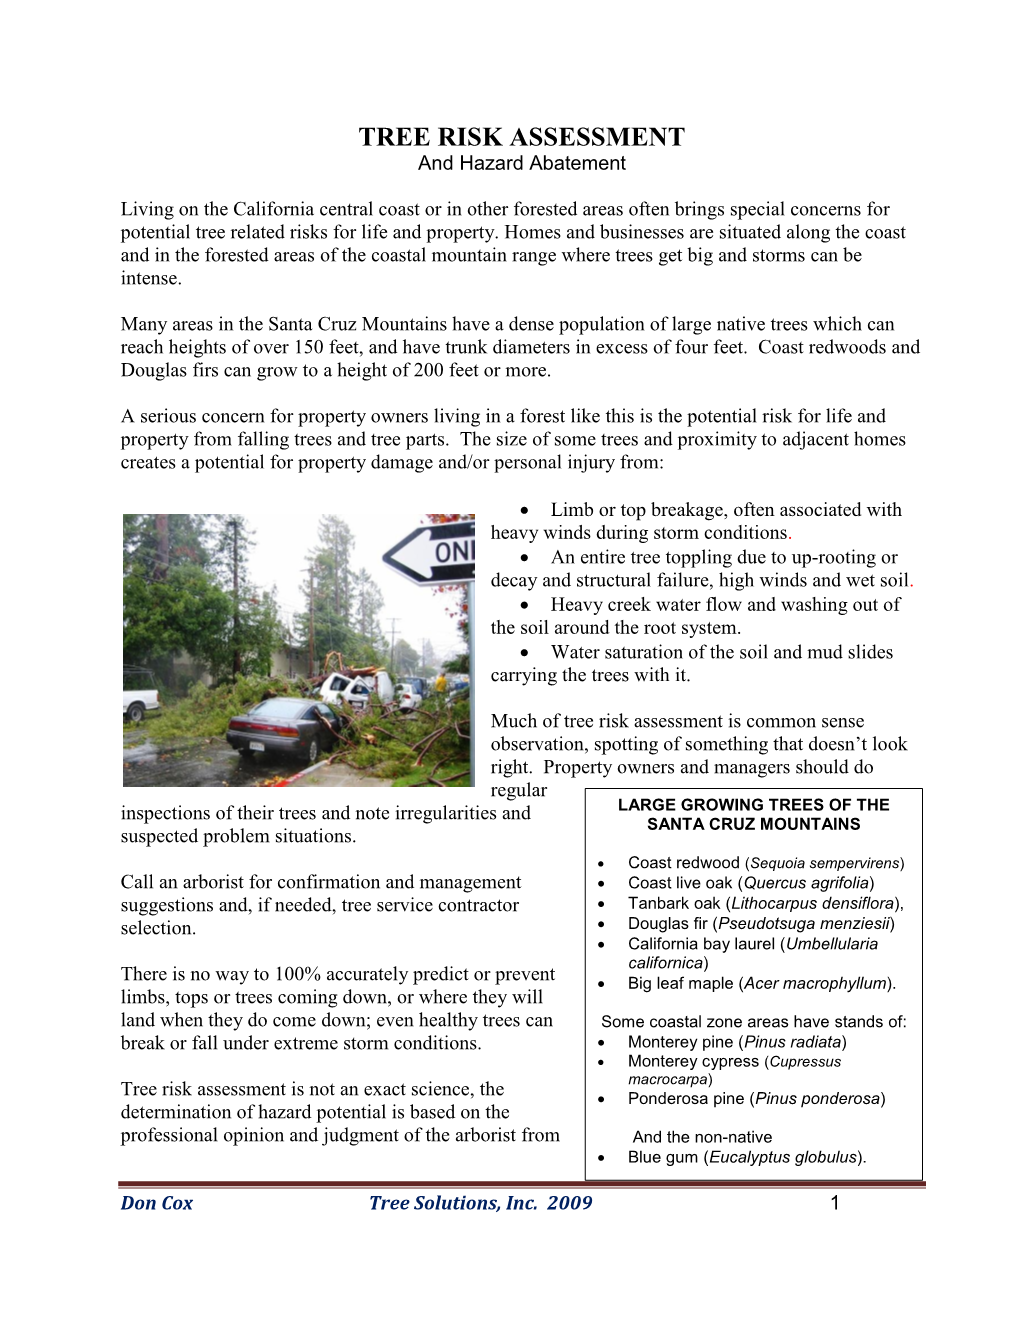 TREE RISK ASSESSMENT and Hazard Abatement